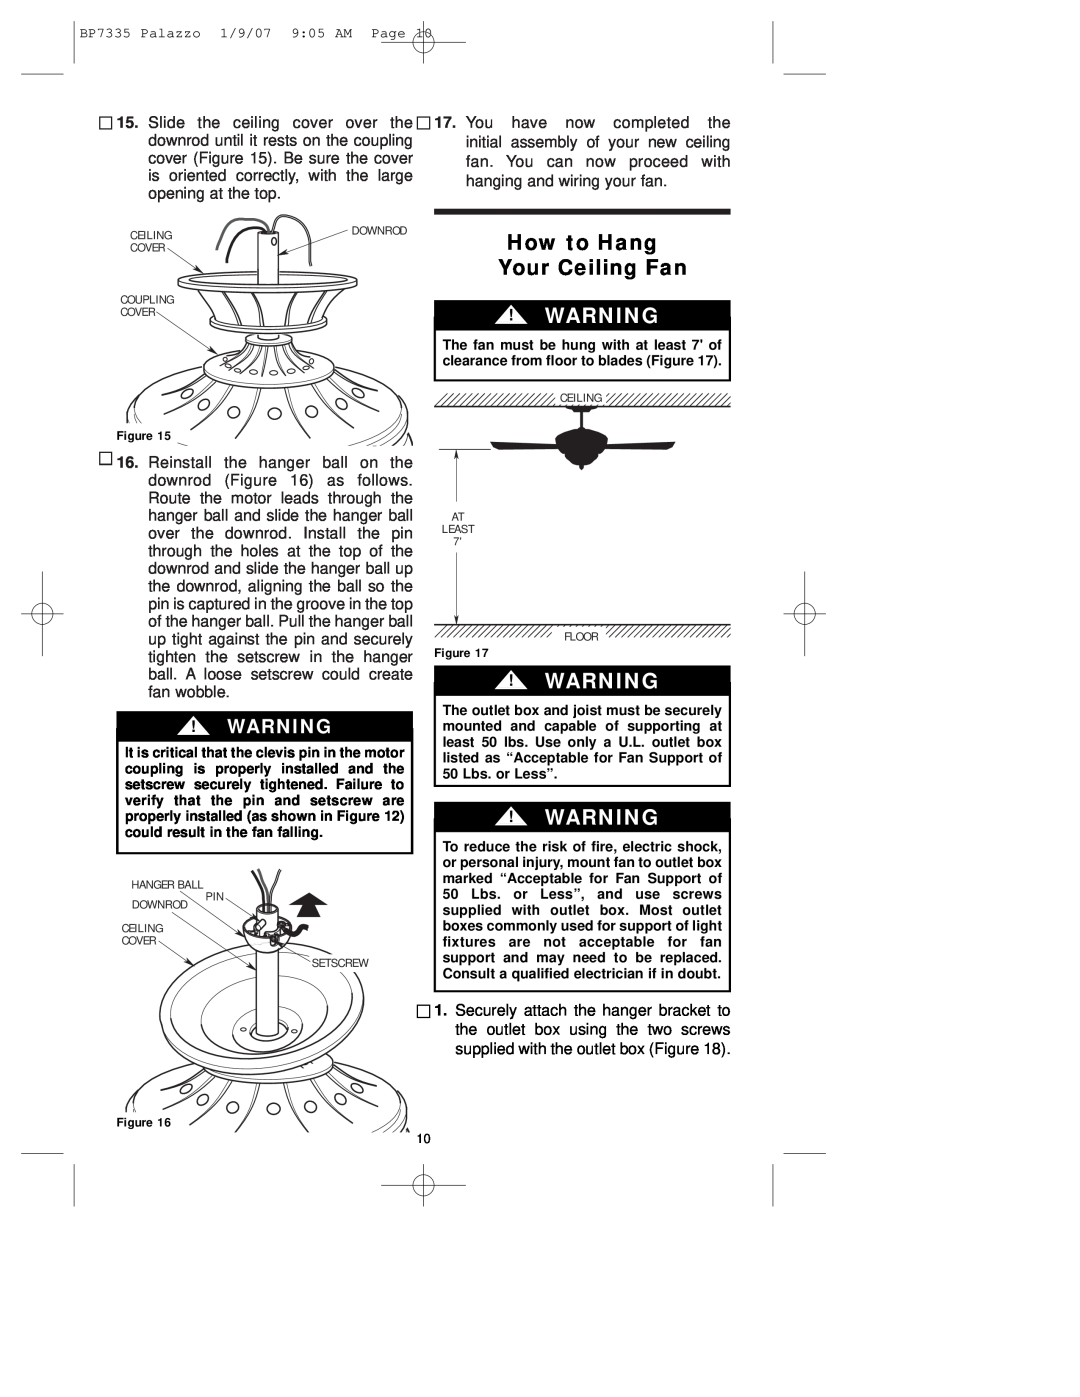 Emerson CF943 owner manual How to Hang Your Ceiling Fan 